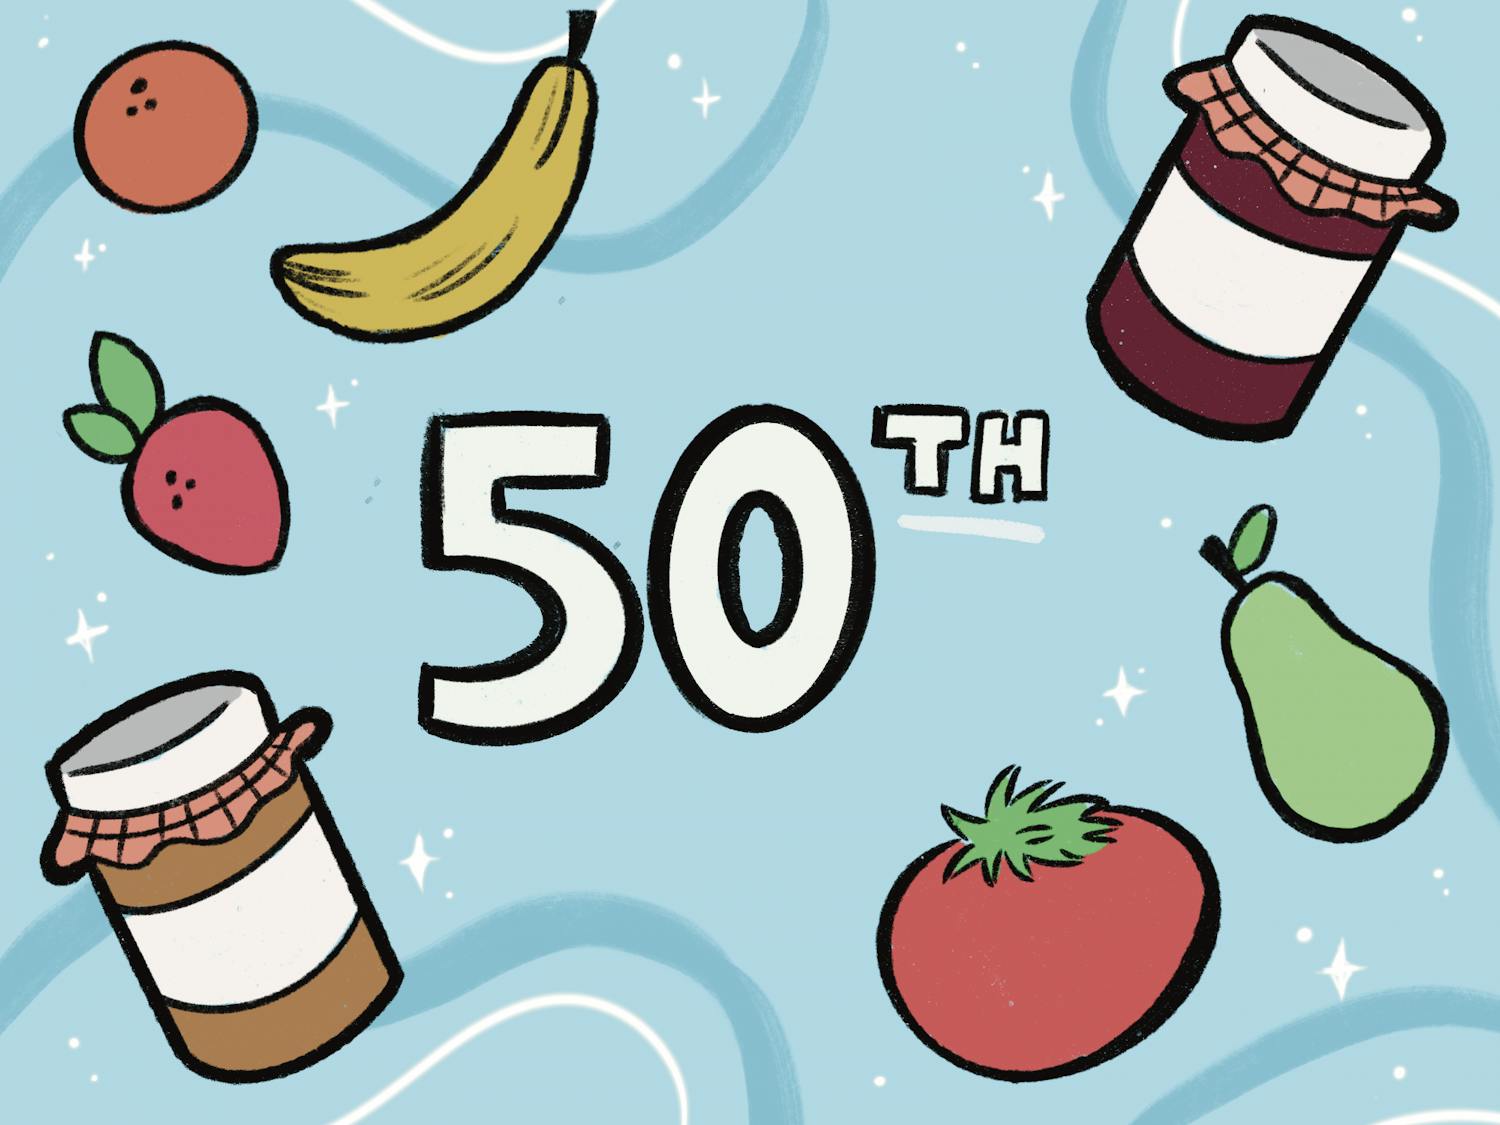 TINDONGAN_The Athens Farmers Market will be celebrating its 50th year this June_LA.png